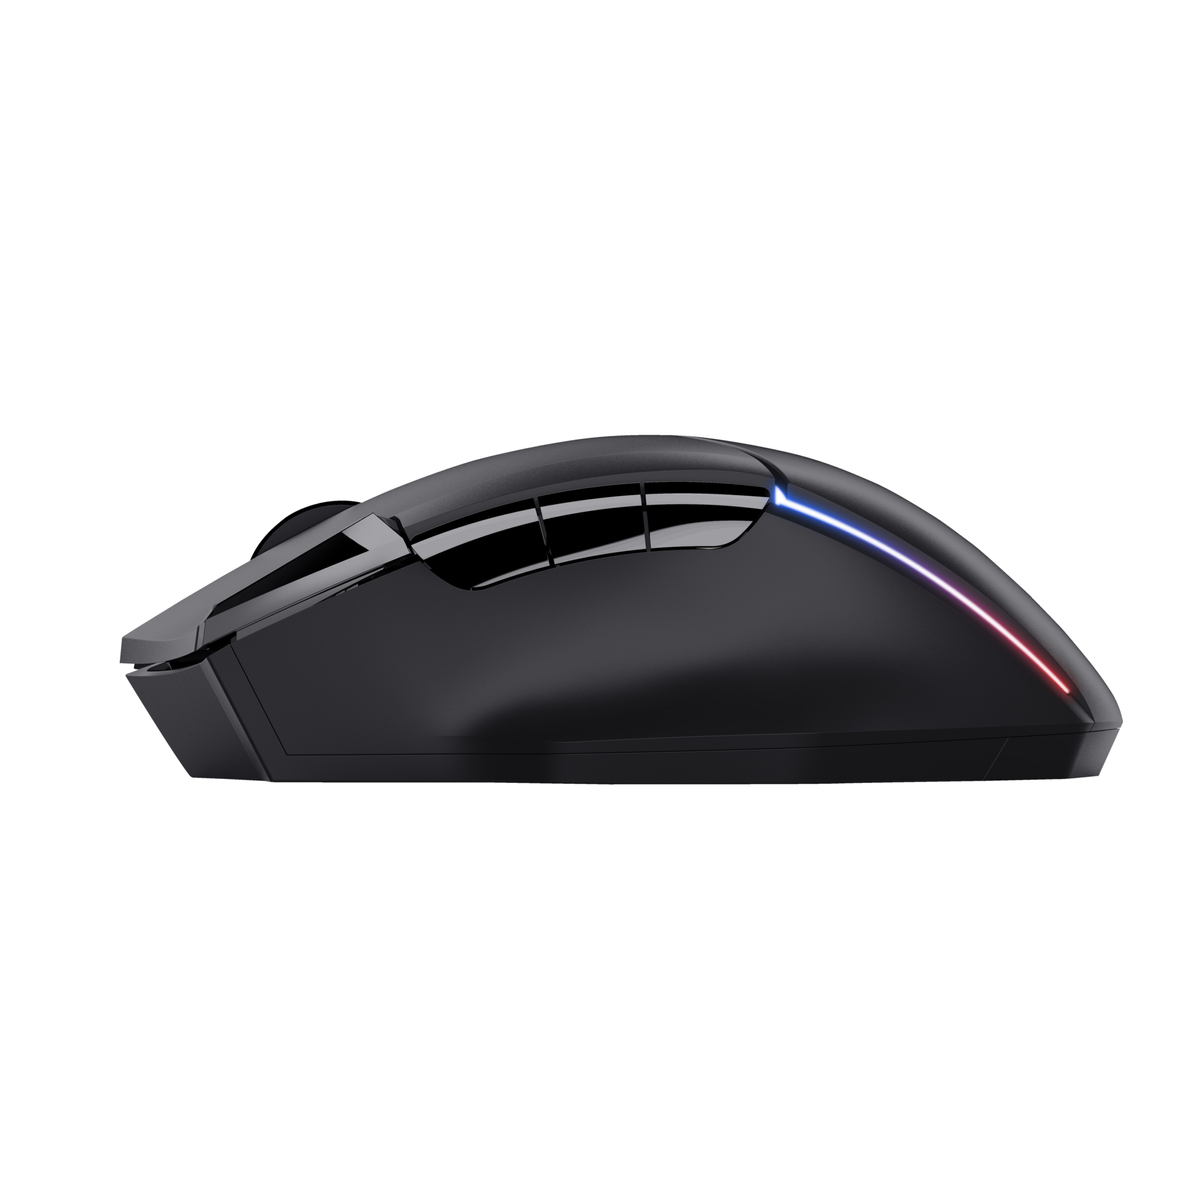 GXT 131 Ranoo Wireless Gaming Mouse ECO